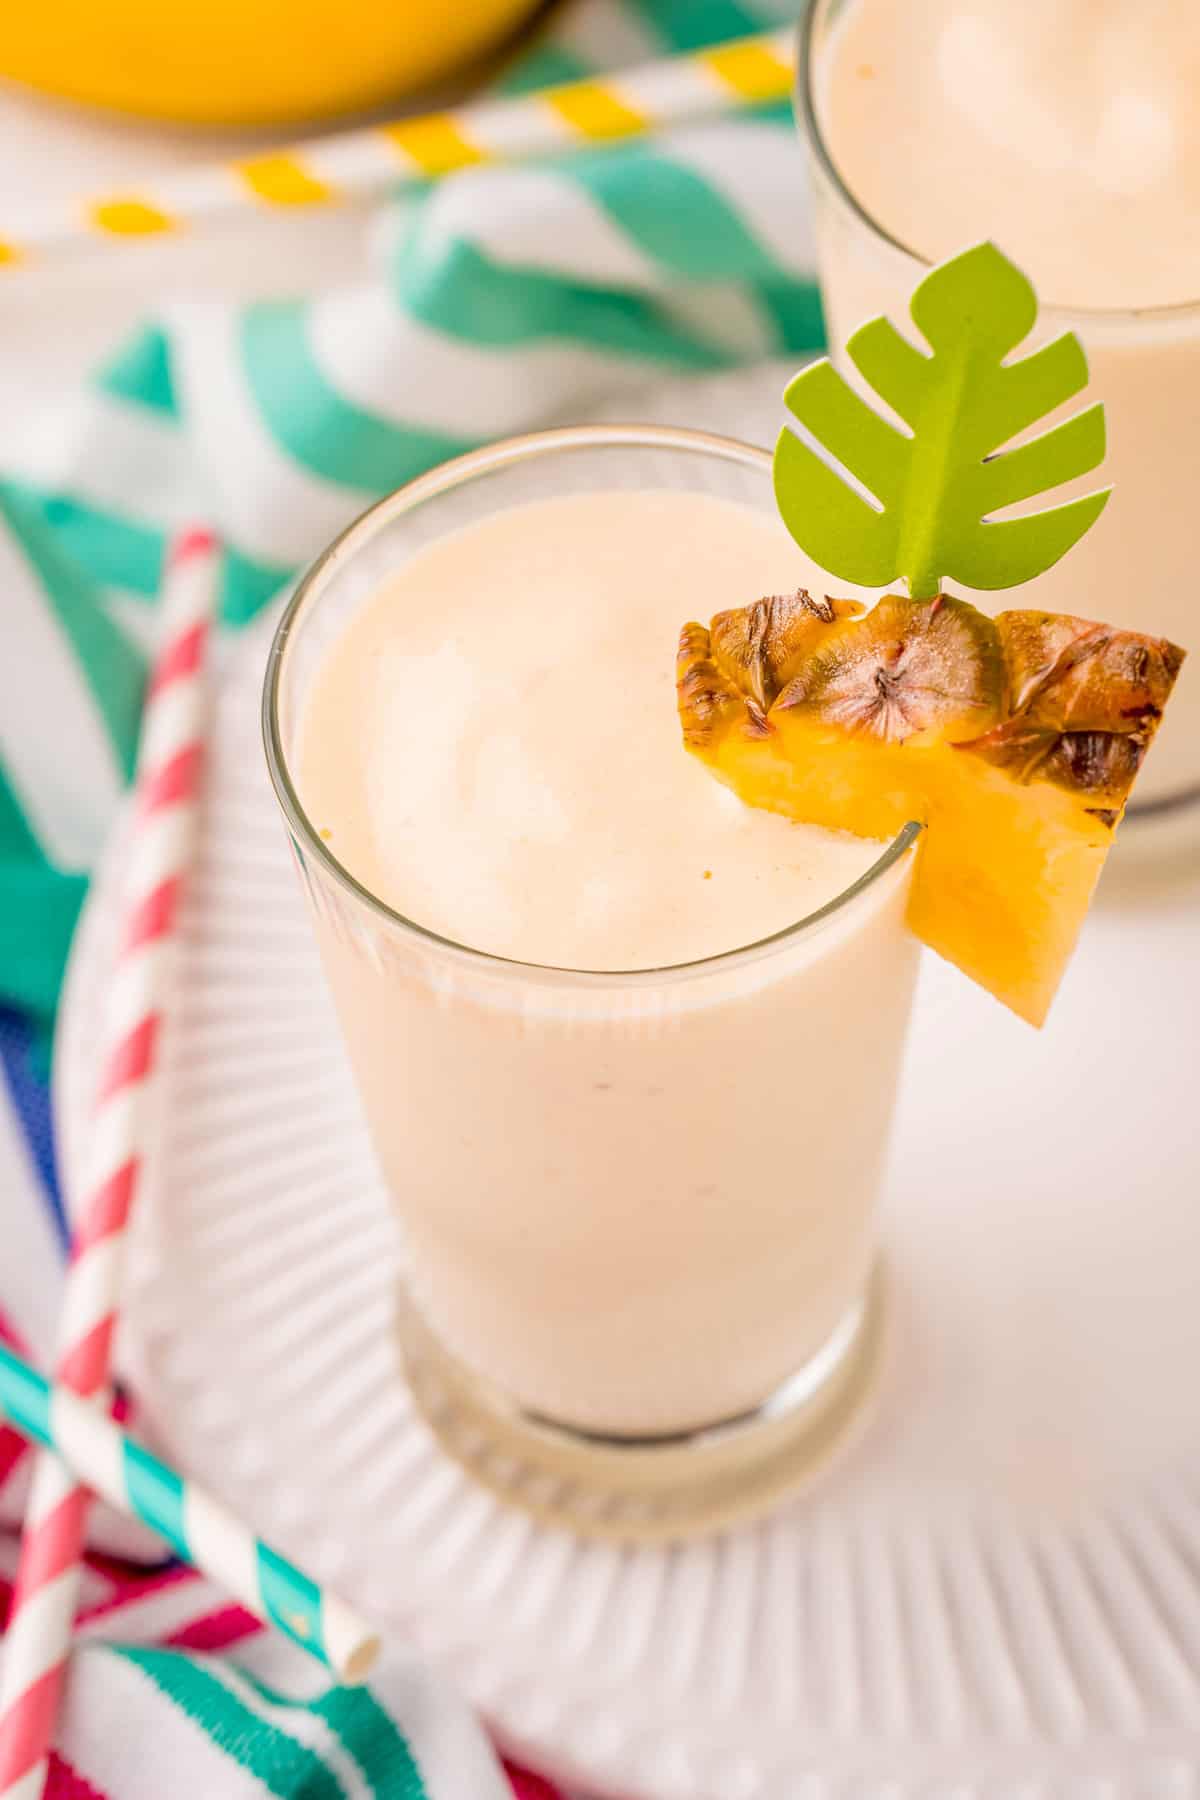 Overhead view of pineapple smoothie garnished with fresh pineapple wedge.